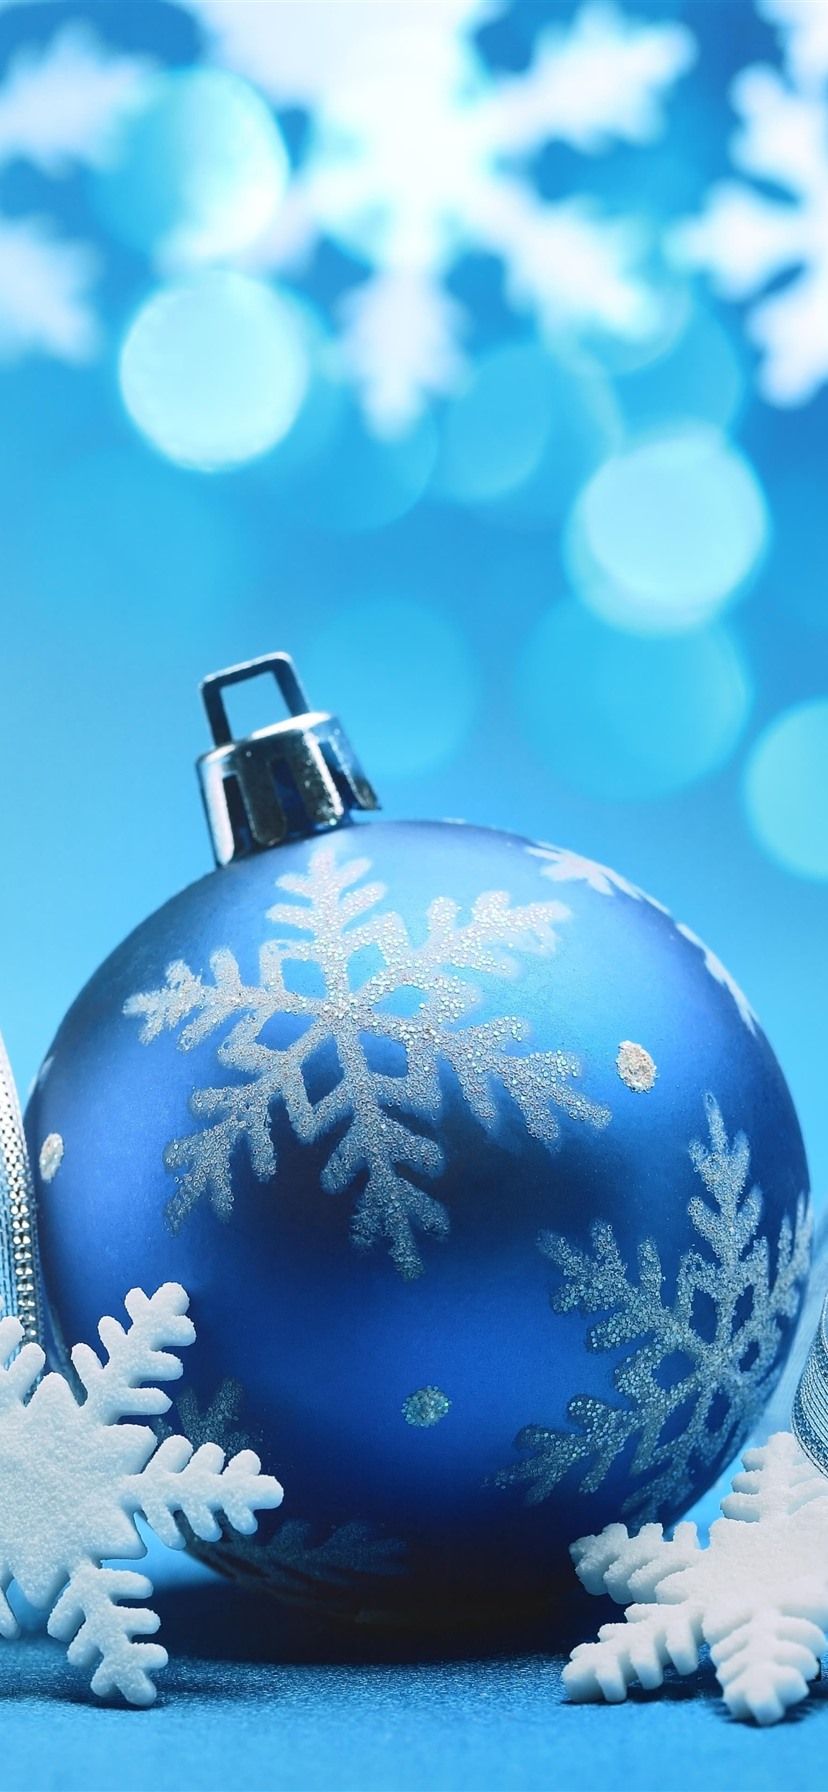 Blue Christmas ball, ribbons, snowflakes, blue backgrounds 1242x2688 iPhone 11 Pro/XS Max wallpaper, background, picture, image